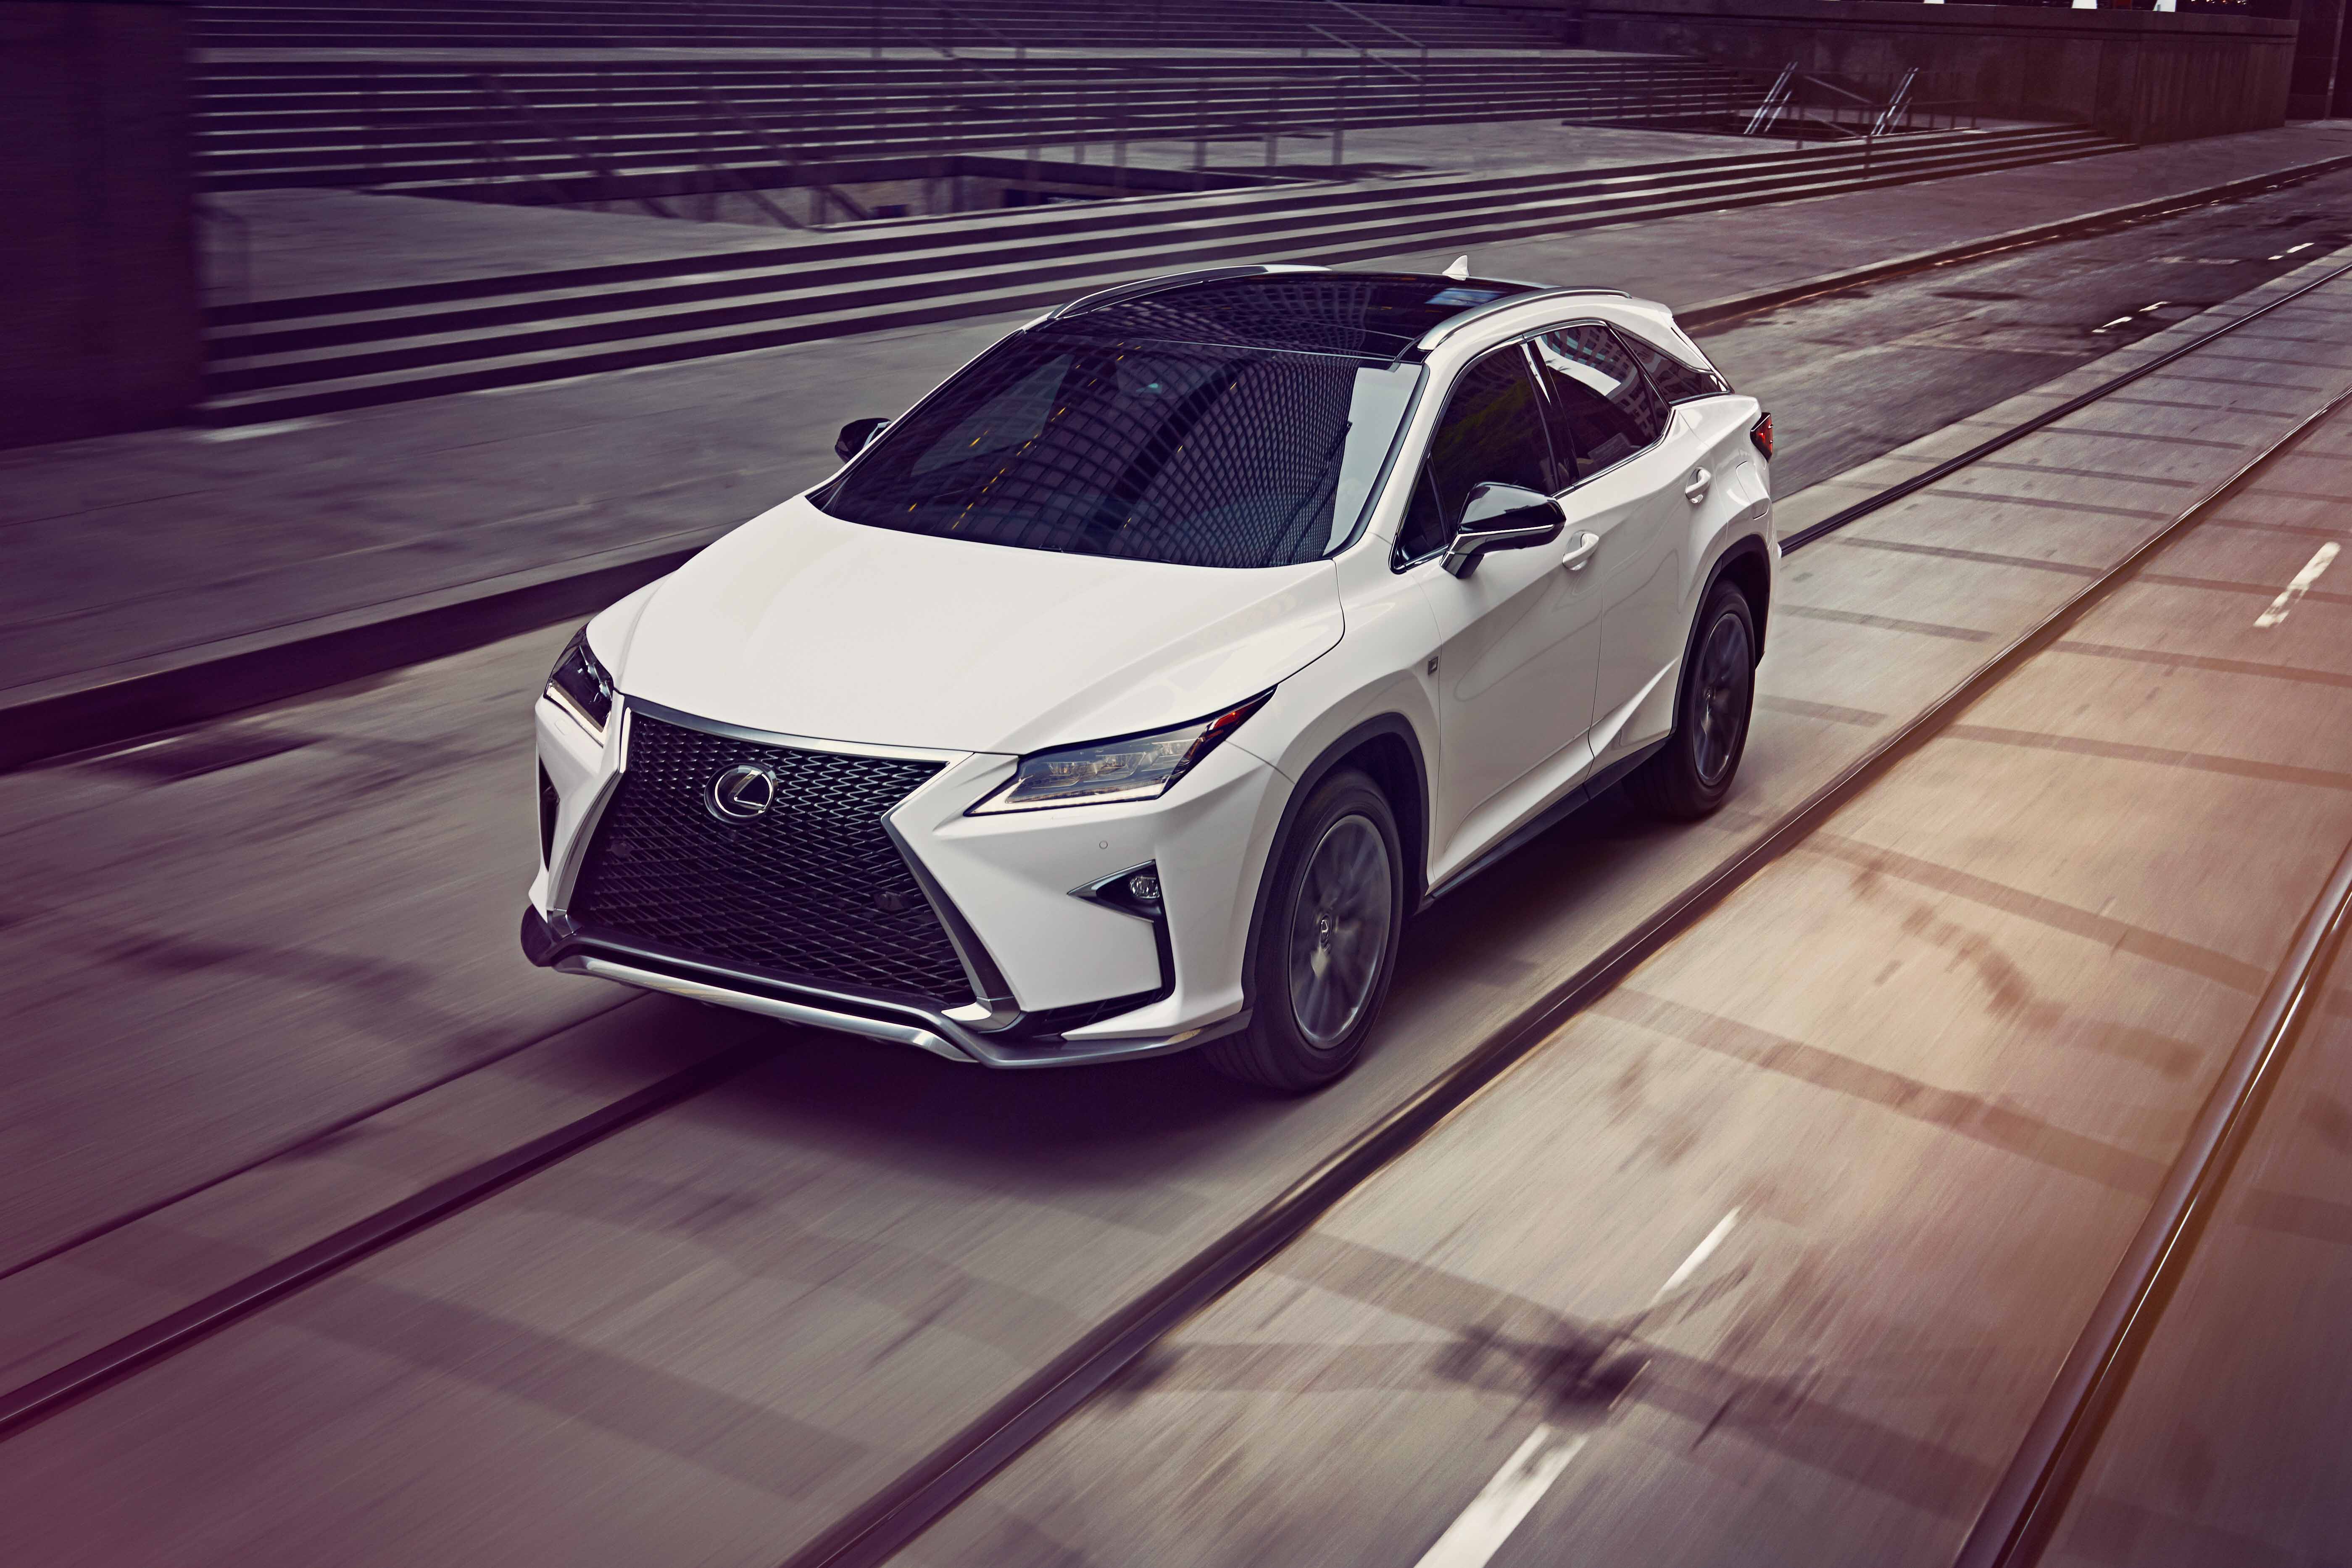 How would you describe this potential Lexus RX driver? 